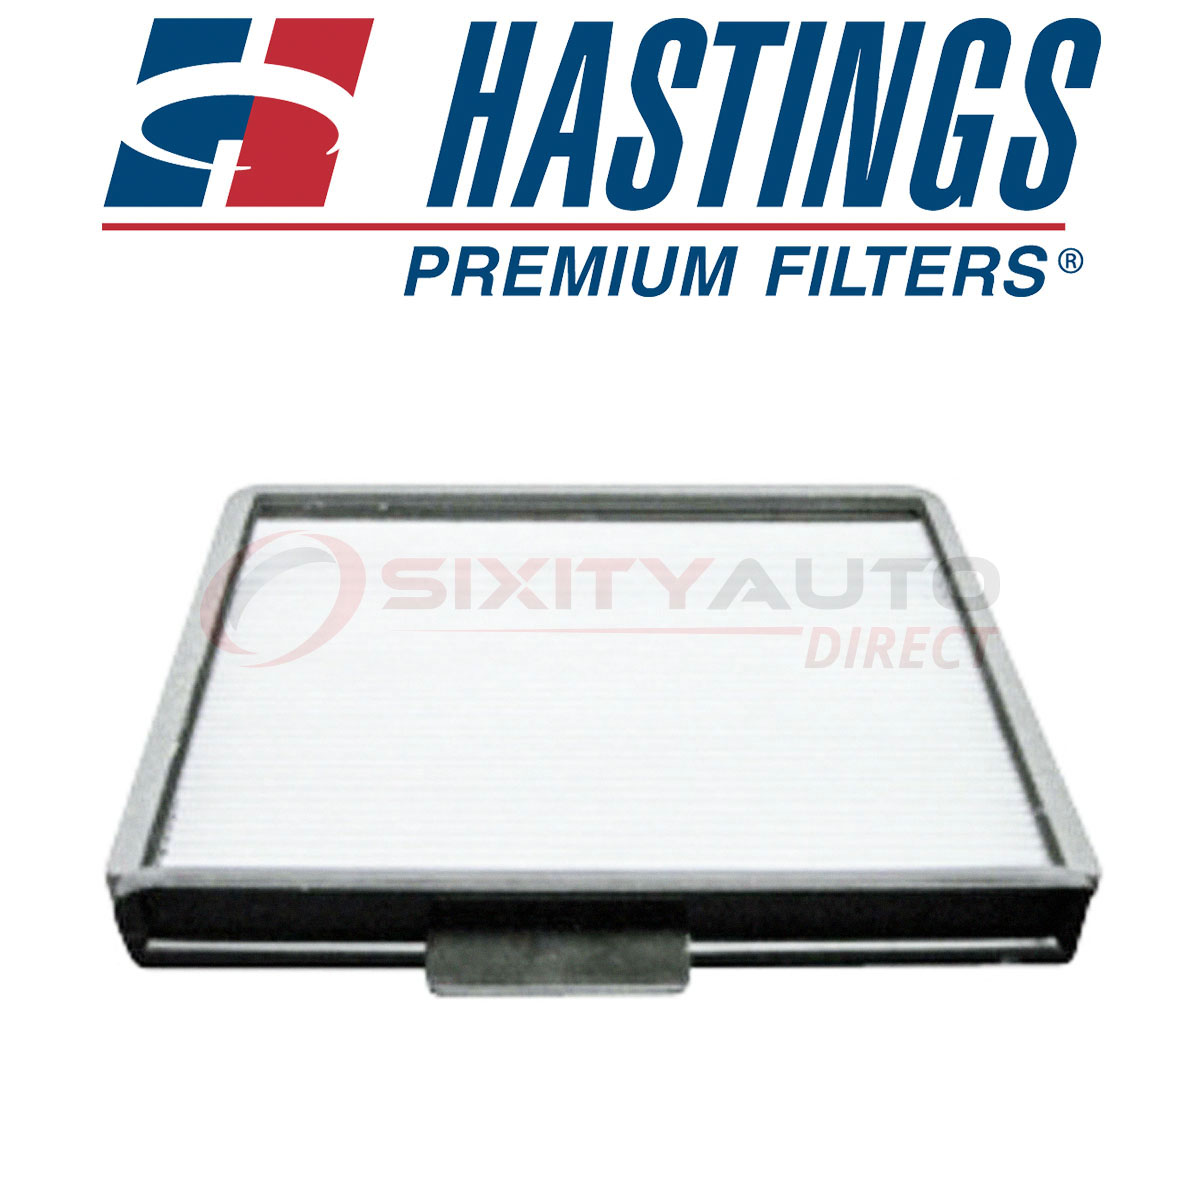 Hastings Cabin Air Filter for 1998-2006 Lincoln Navigator 5.4L V8 - ob | eBay 2000 Lincoln Navigator Cabin Air Filter Location